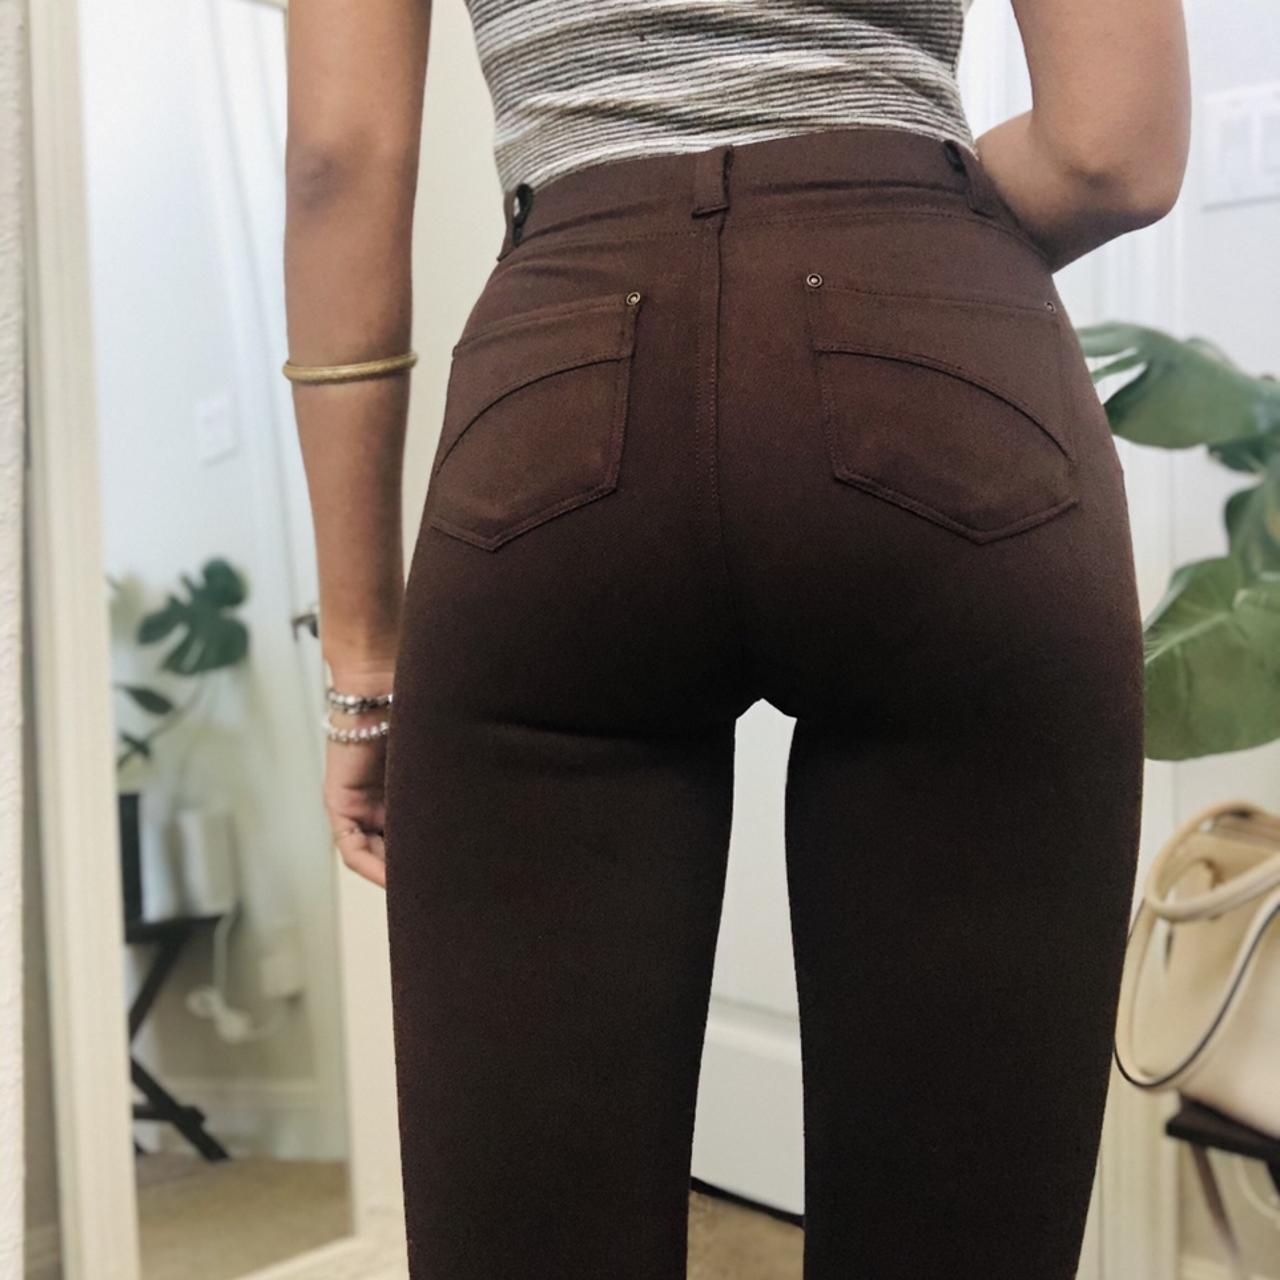 Stretchy brown jeggings with elastic waistband. - Depop